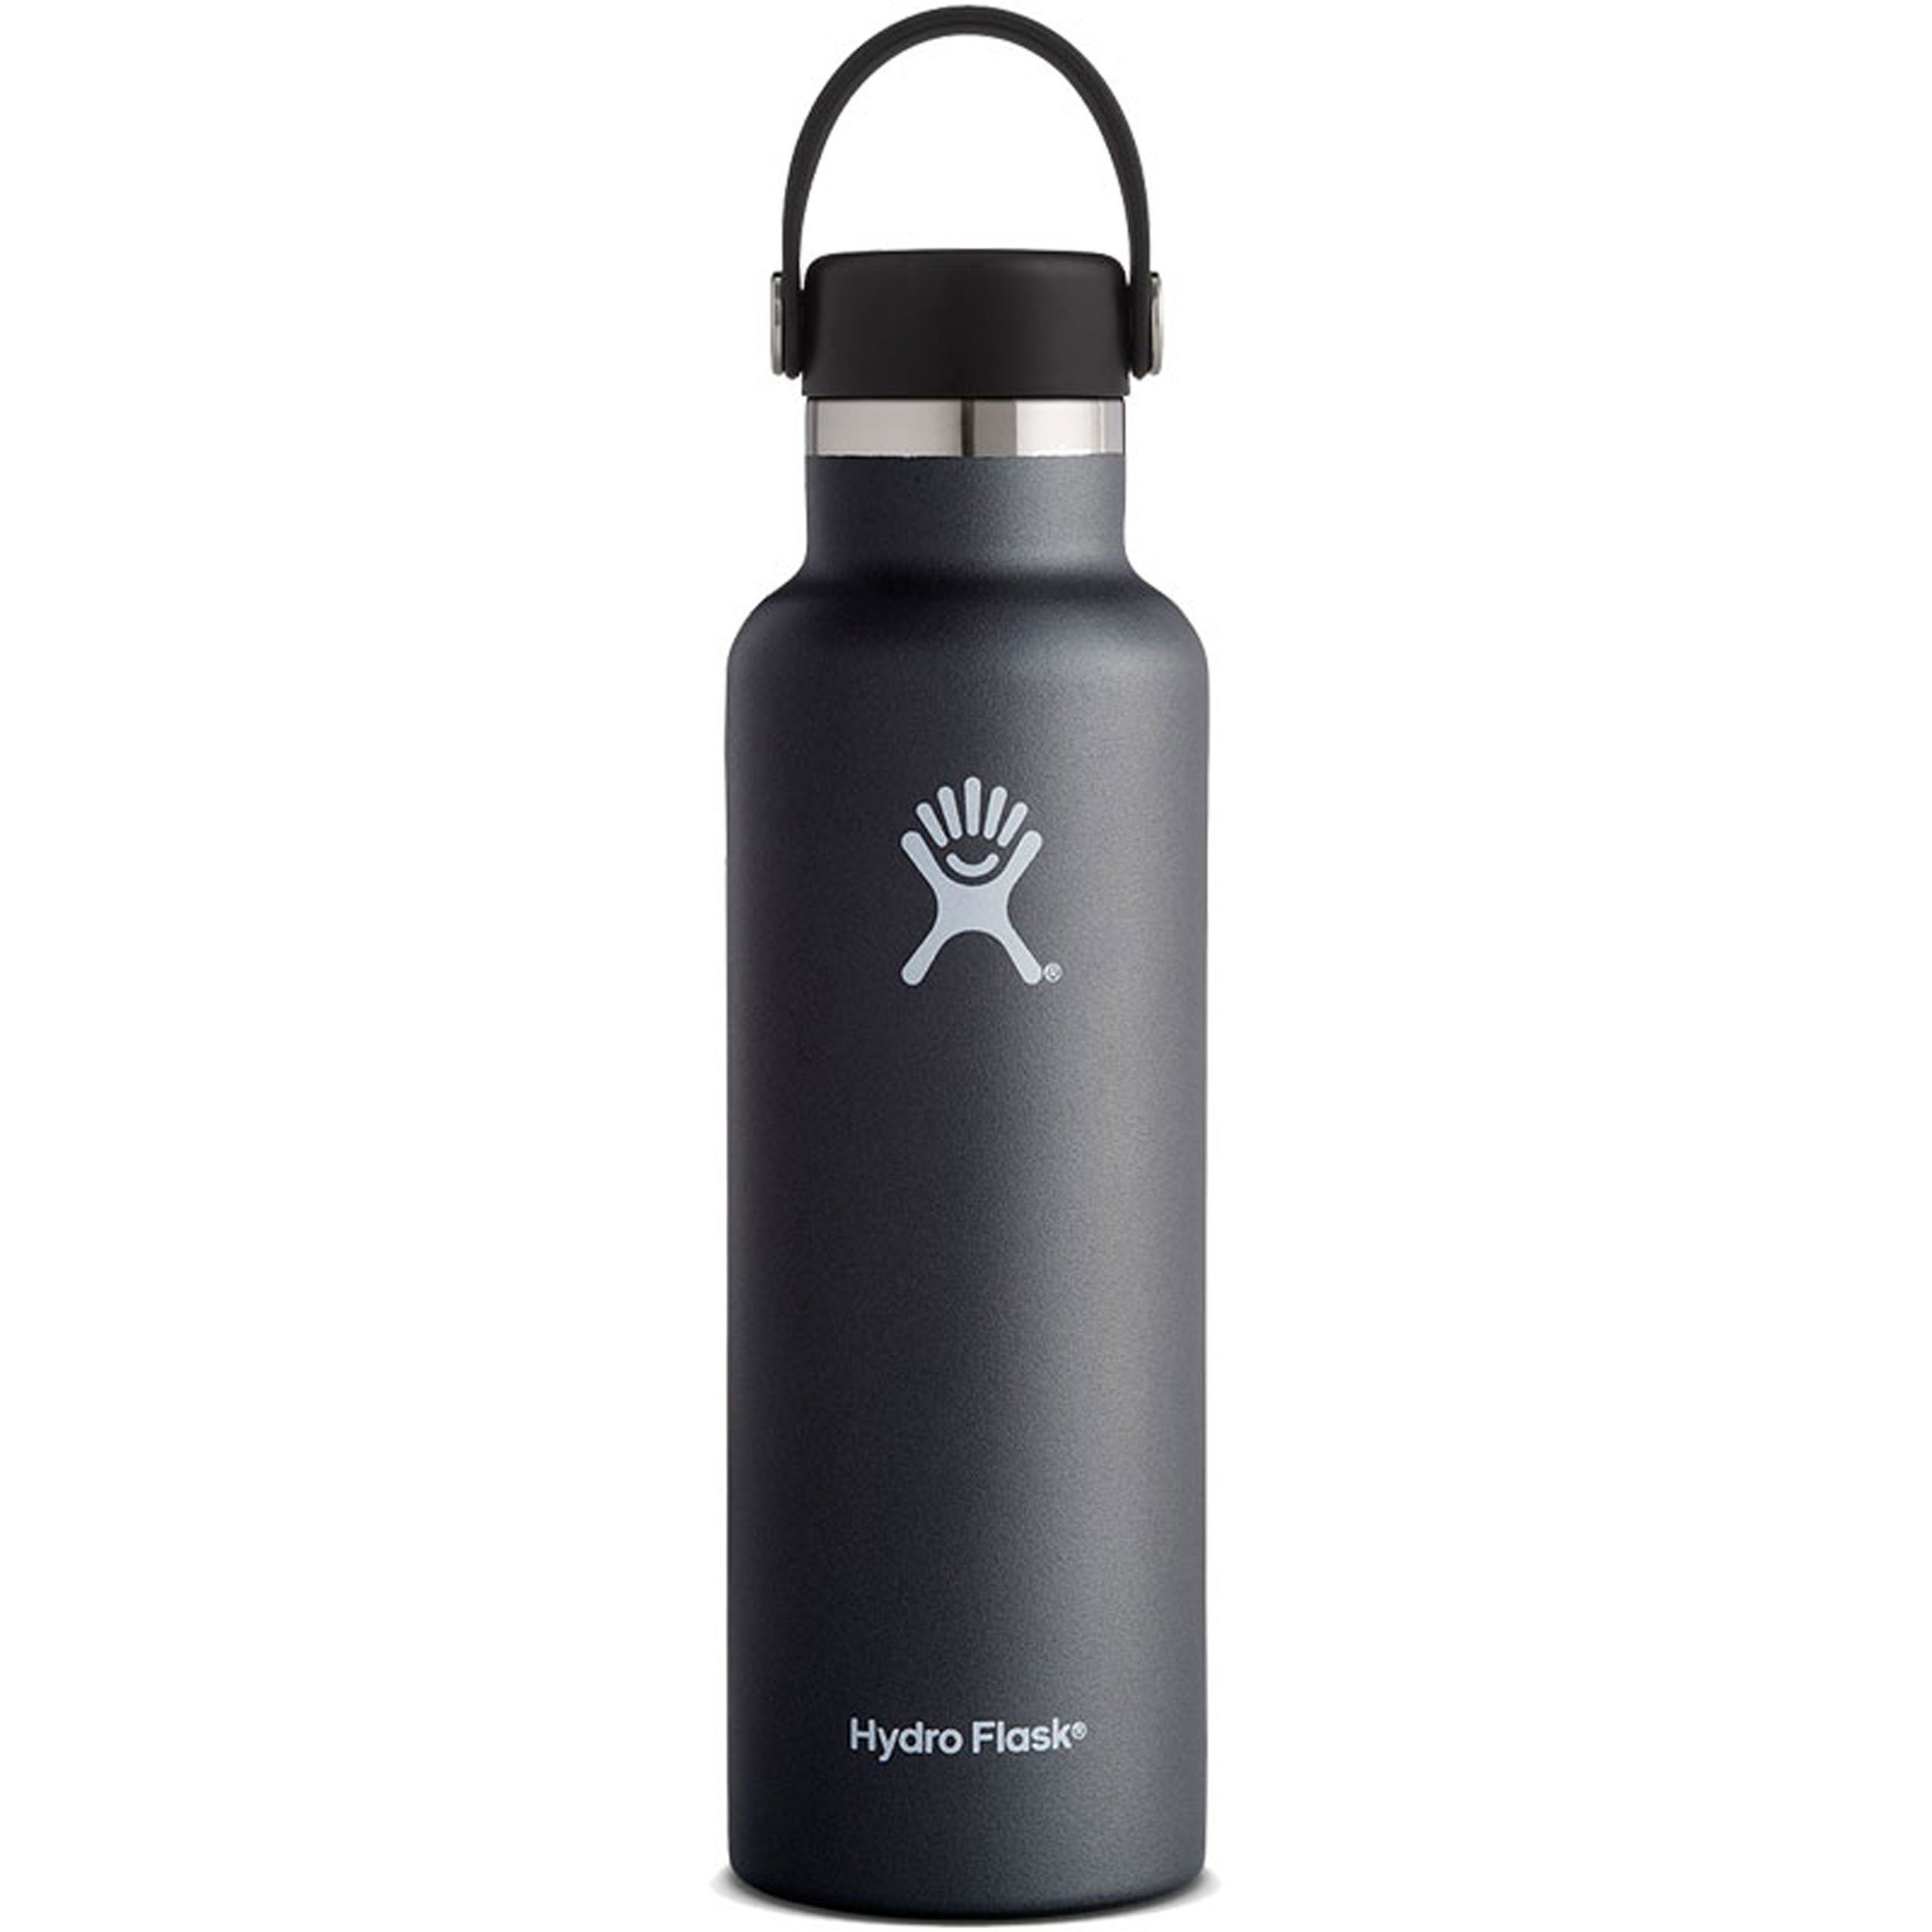 Hydro Flask Isolierflasche Hydro Flask Bottle Standard Mouth - Isolierflasche/Thermoflasche black